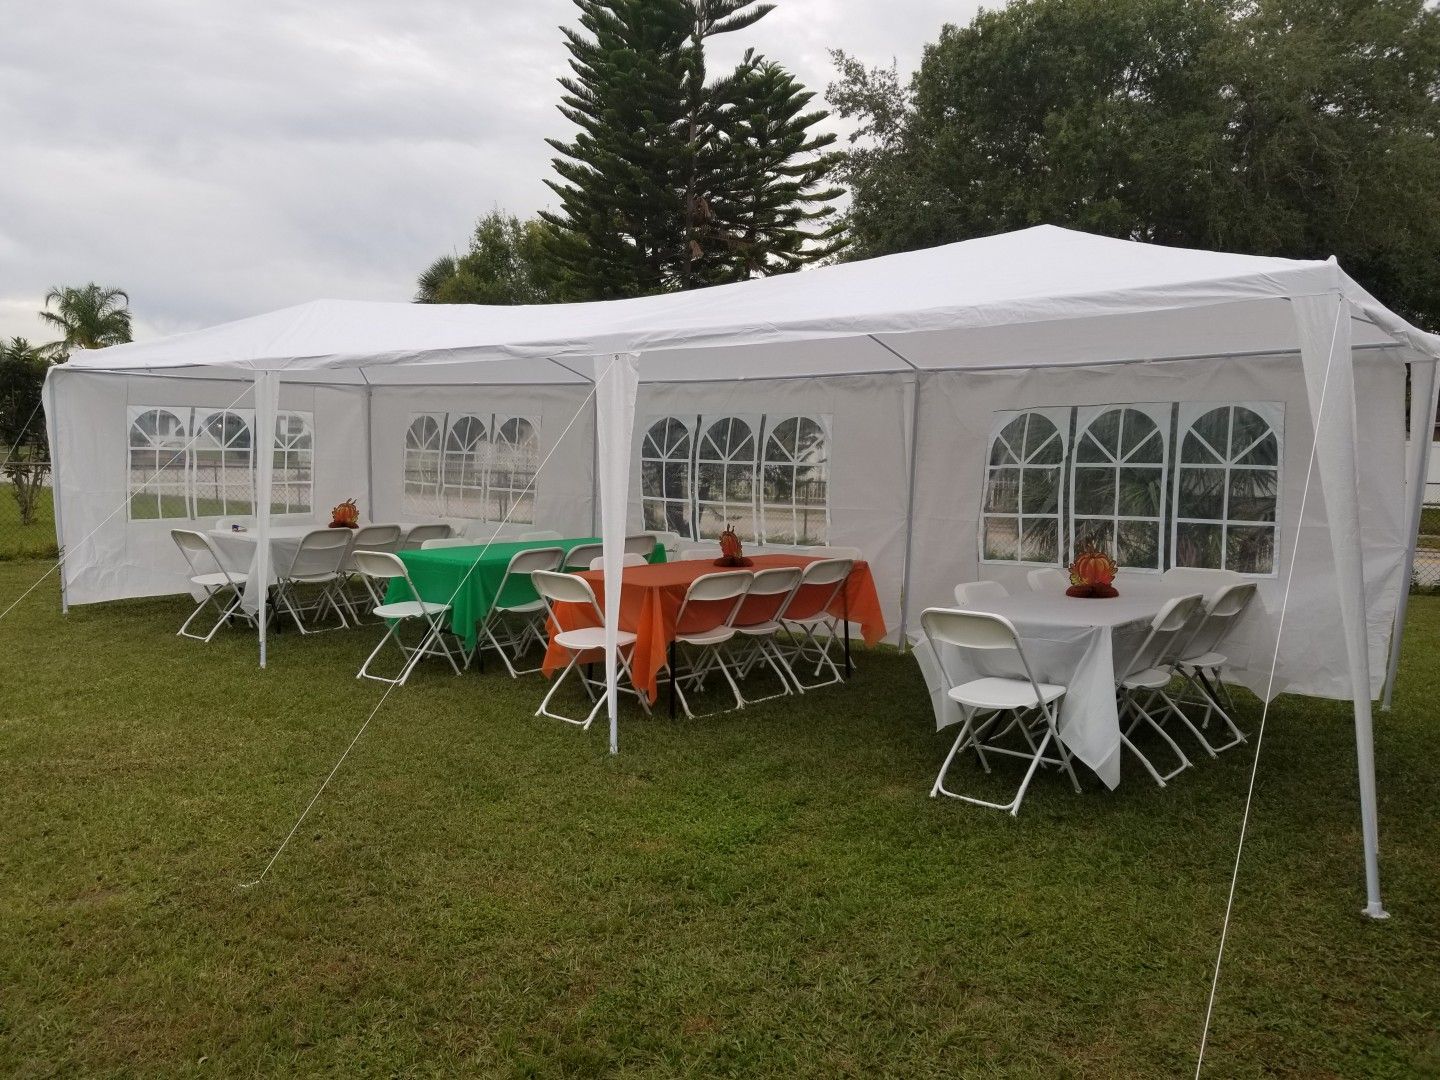 Brand new 10×30 party tent